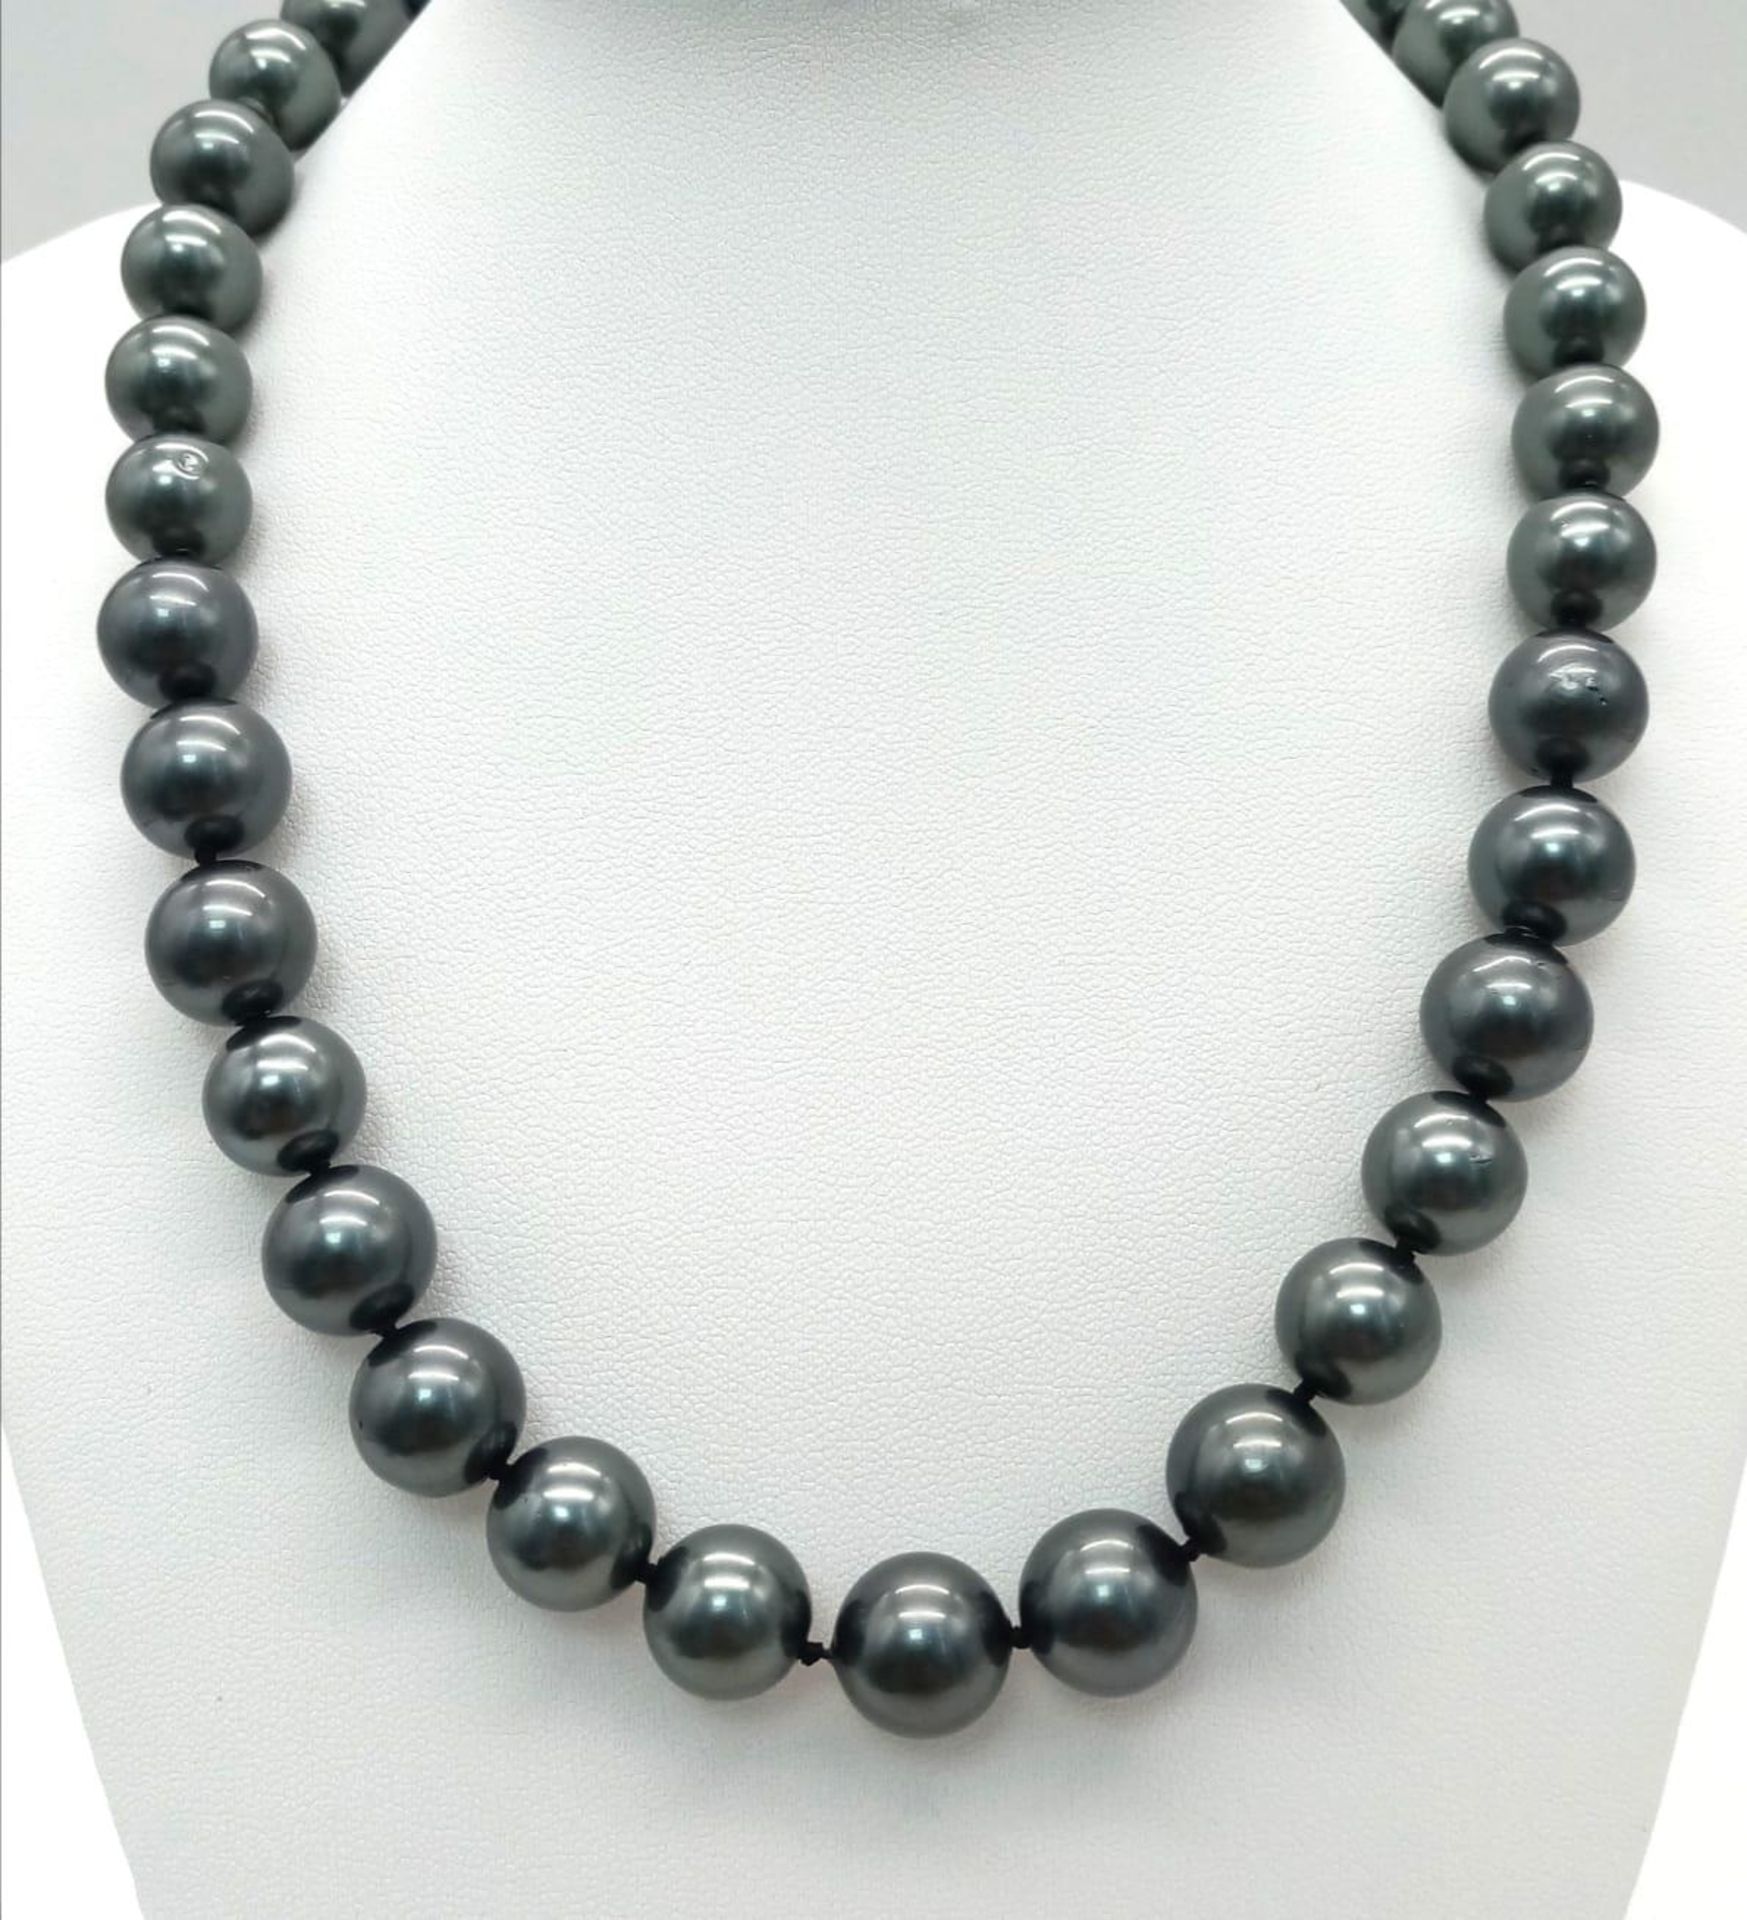 A Metallic Grey South Sea Pearl Shell Necklace. Beads - 12mm. Necklace length - 42cm. - Bild 3 aus 3